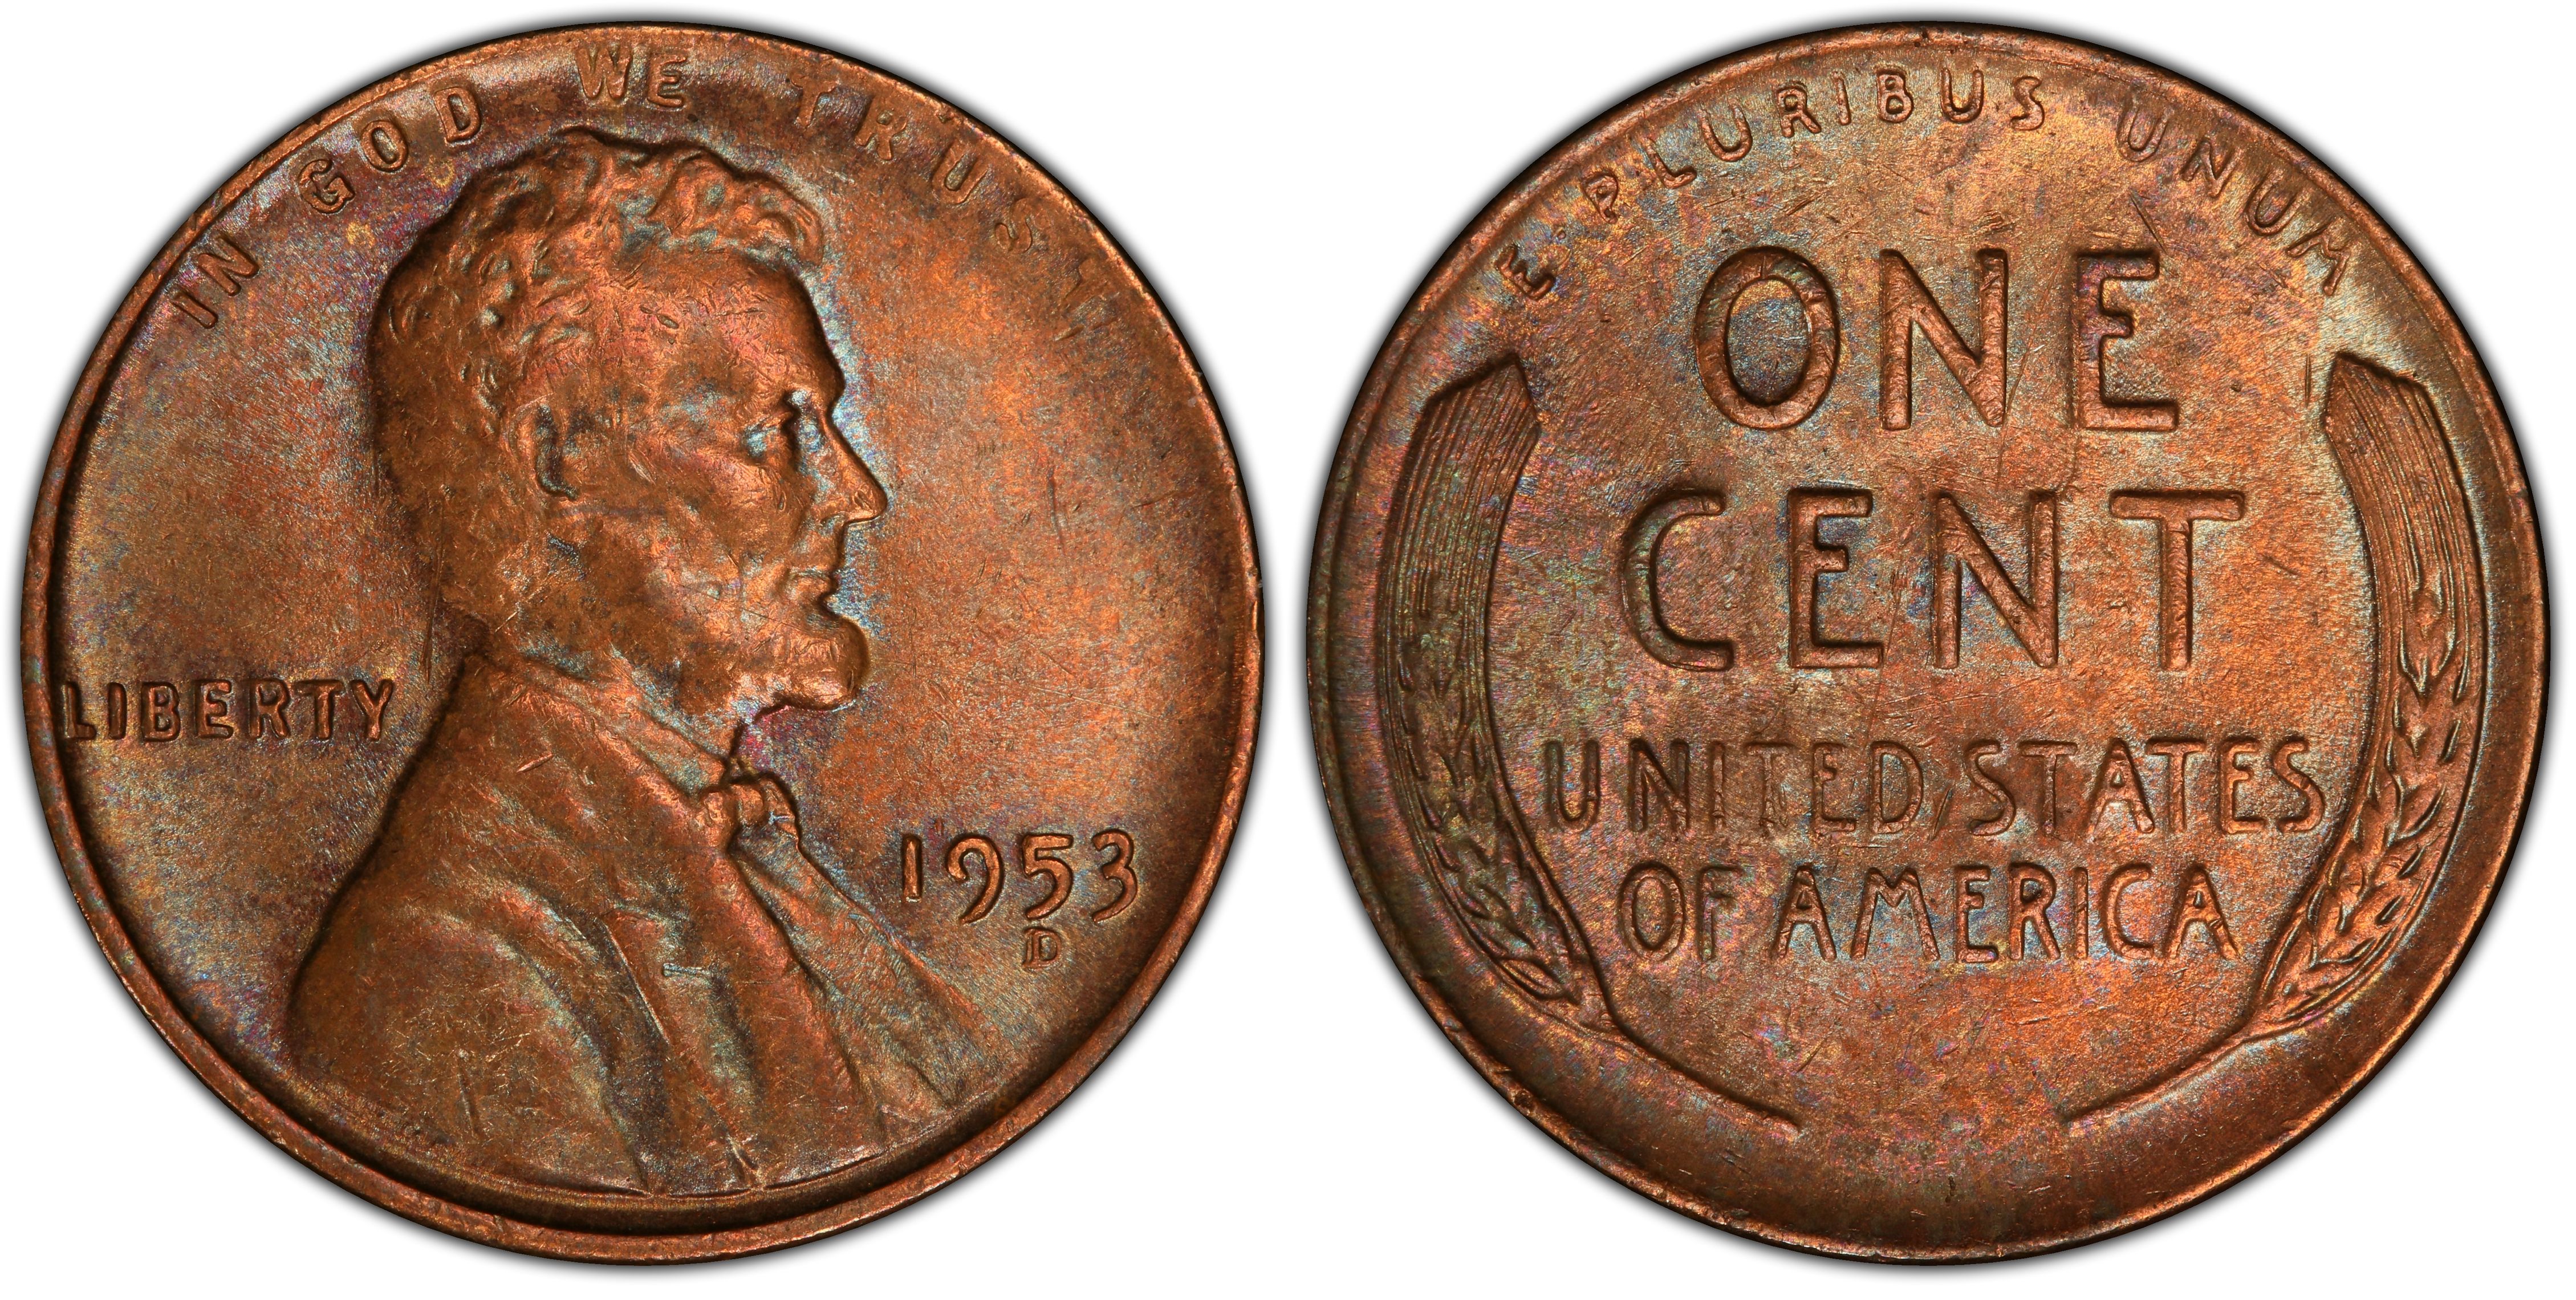 ONE CENT 1953s-